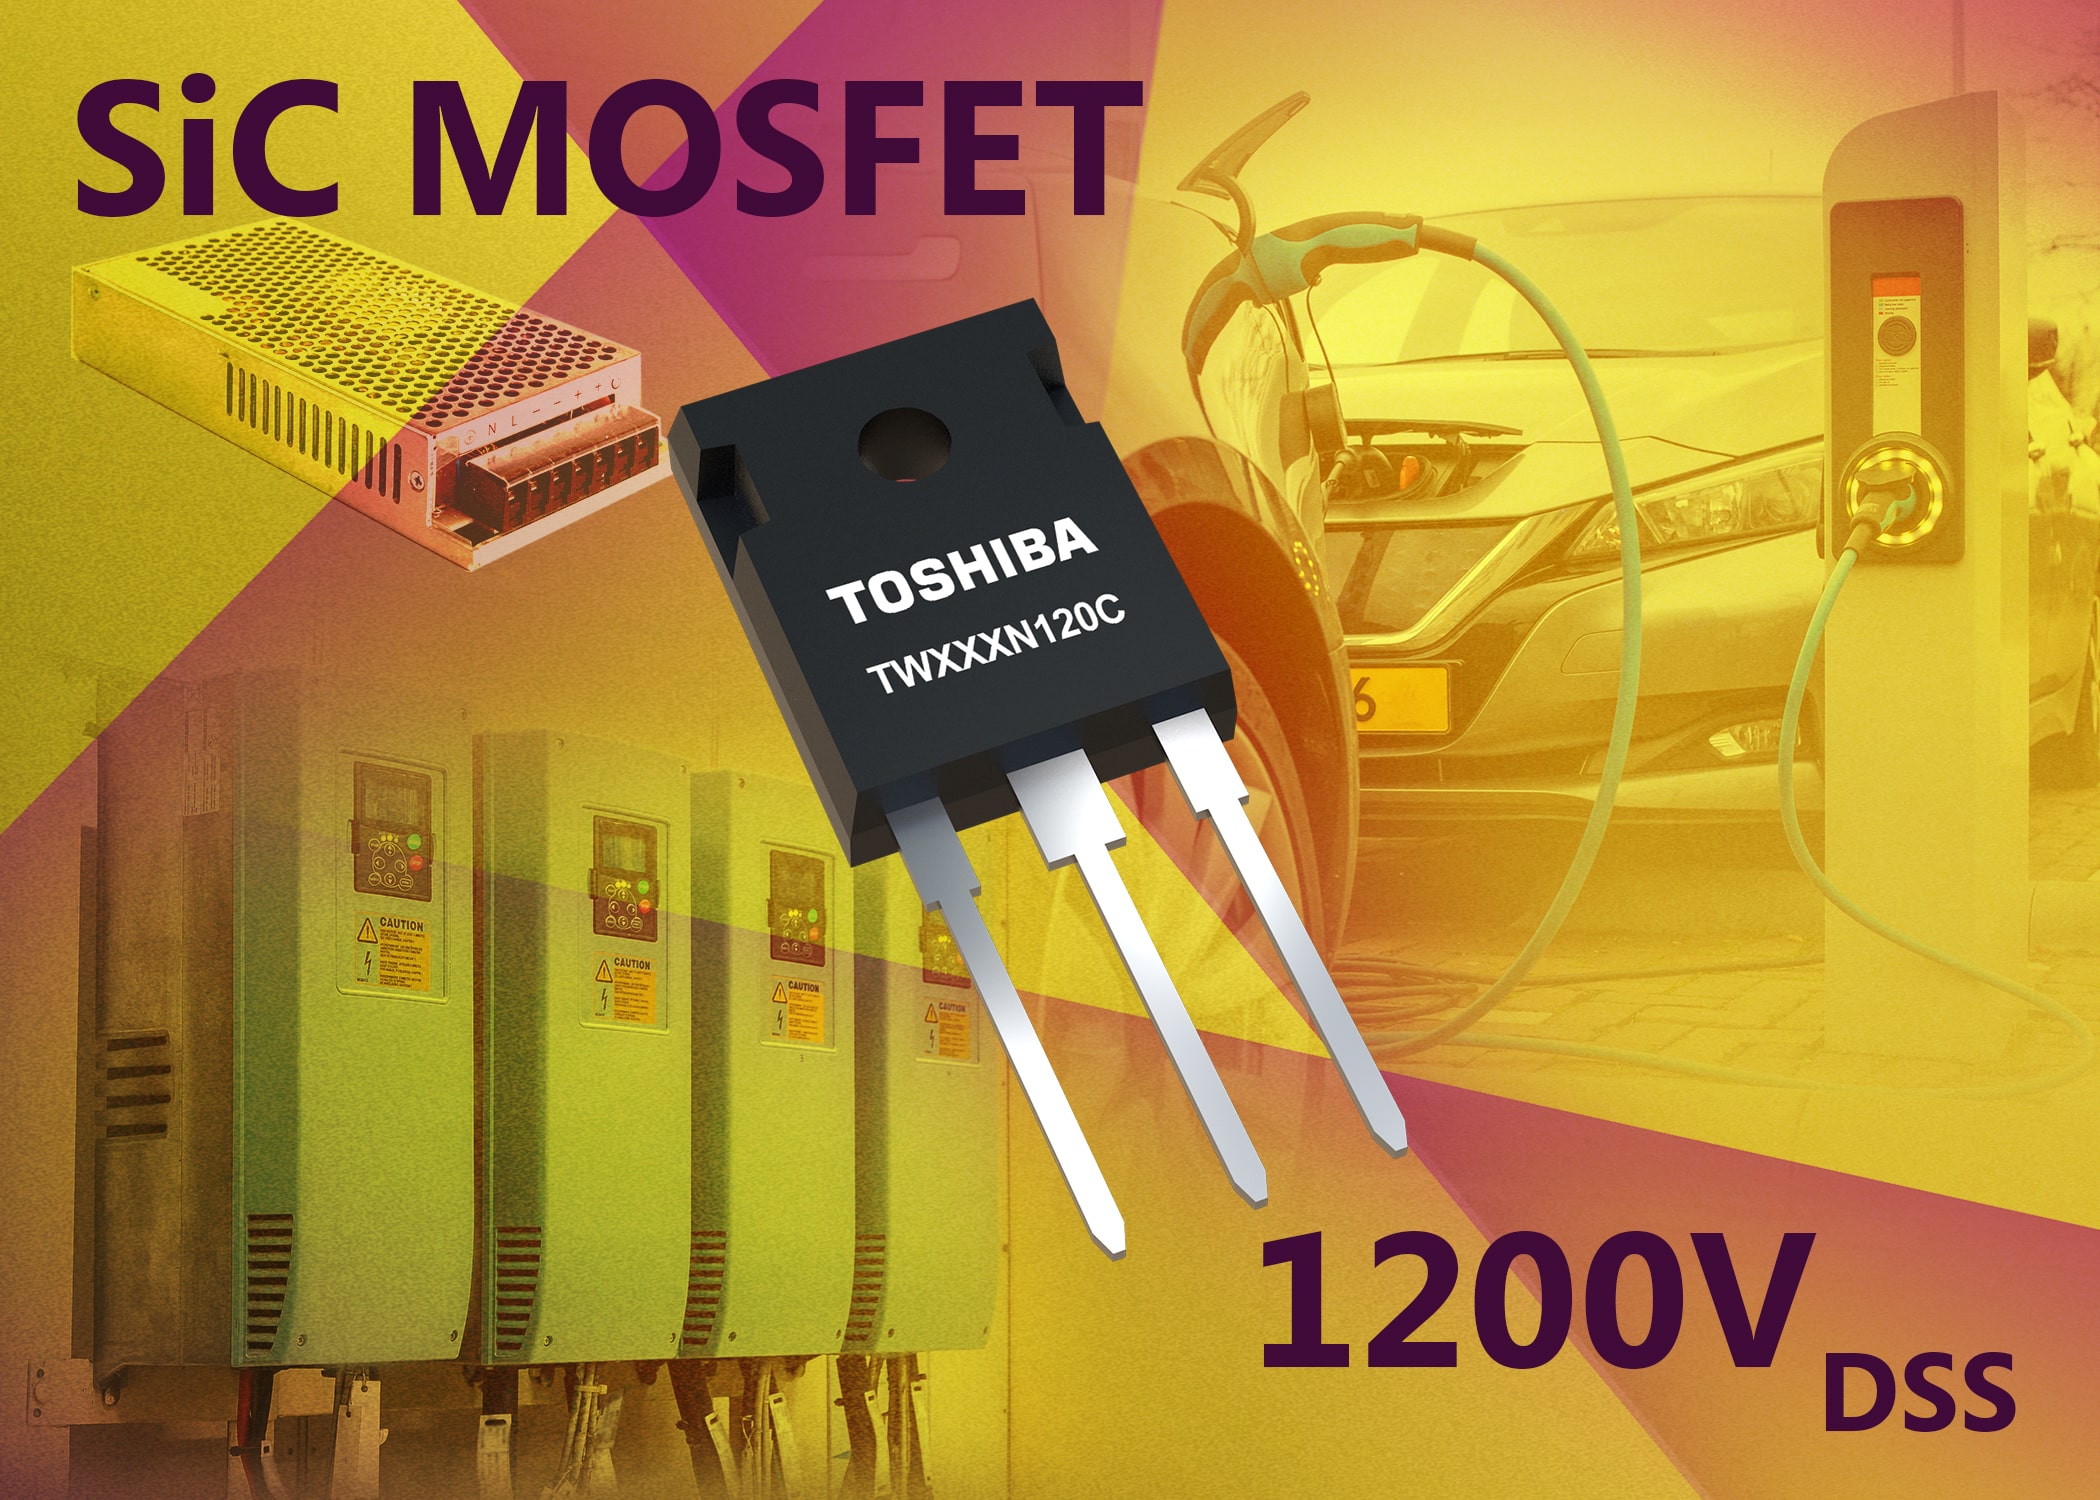 Third generation 1200V SiC MOSFETs from Toshiba boost industrial power-conversion efficiency